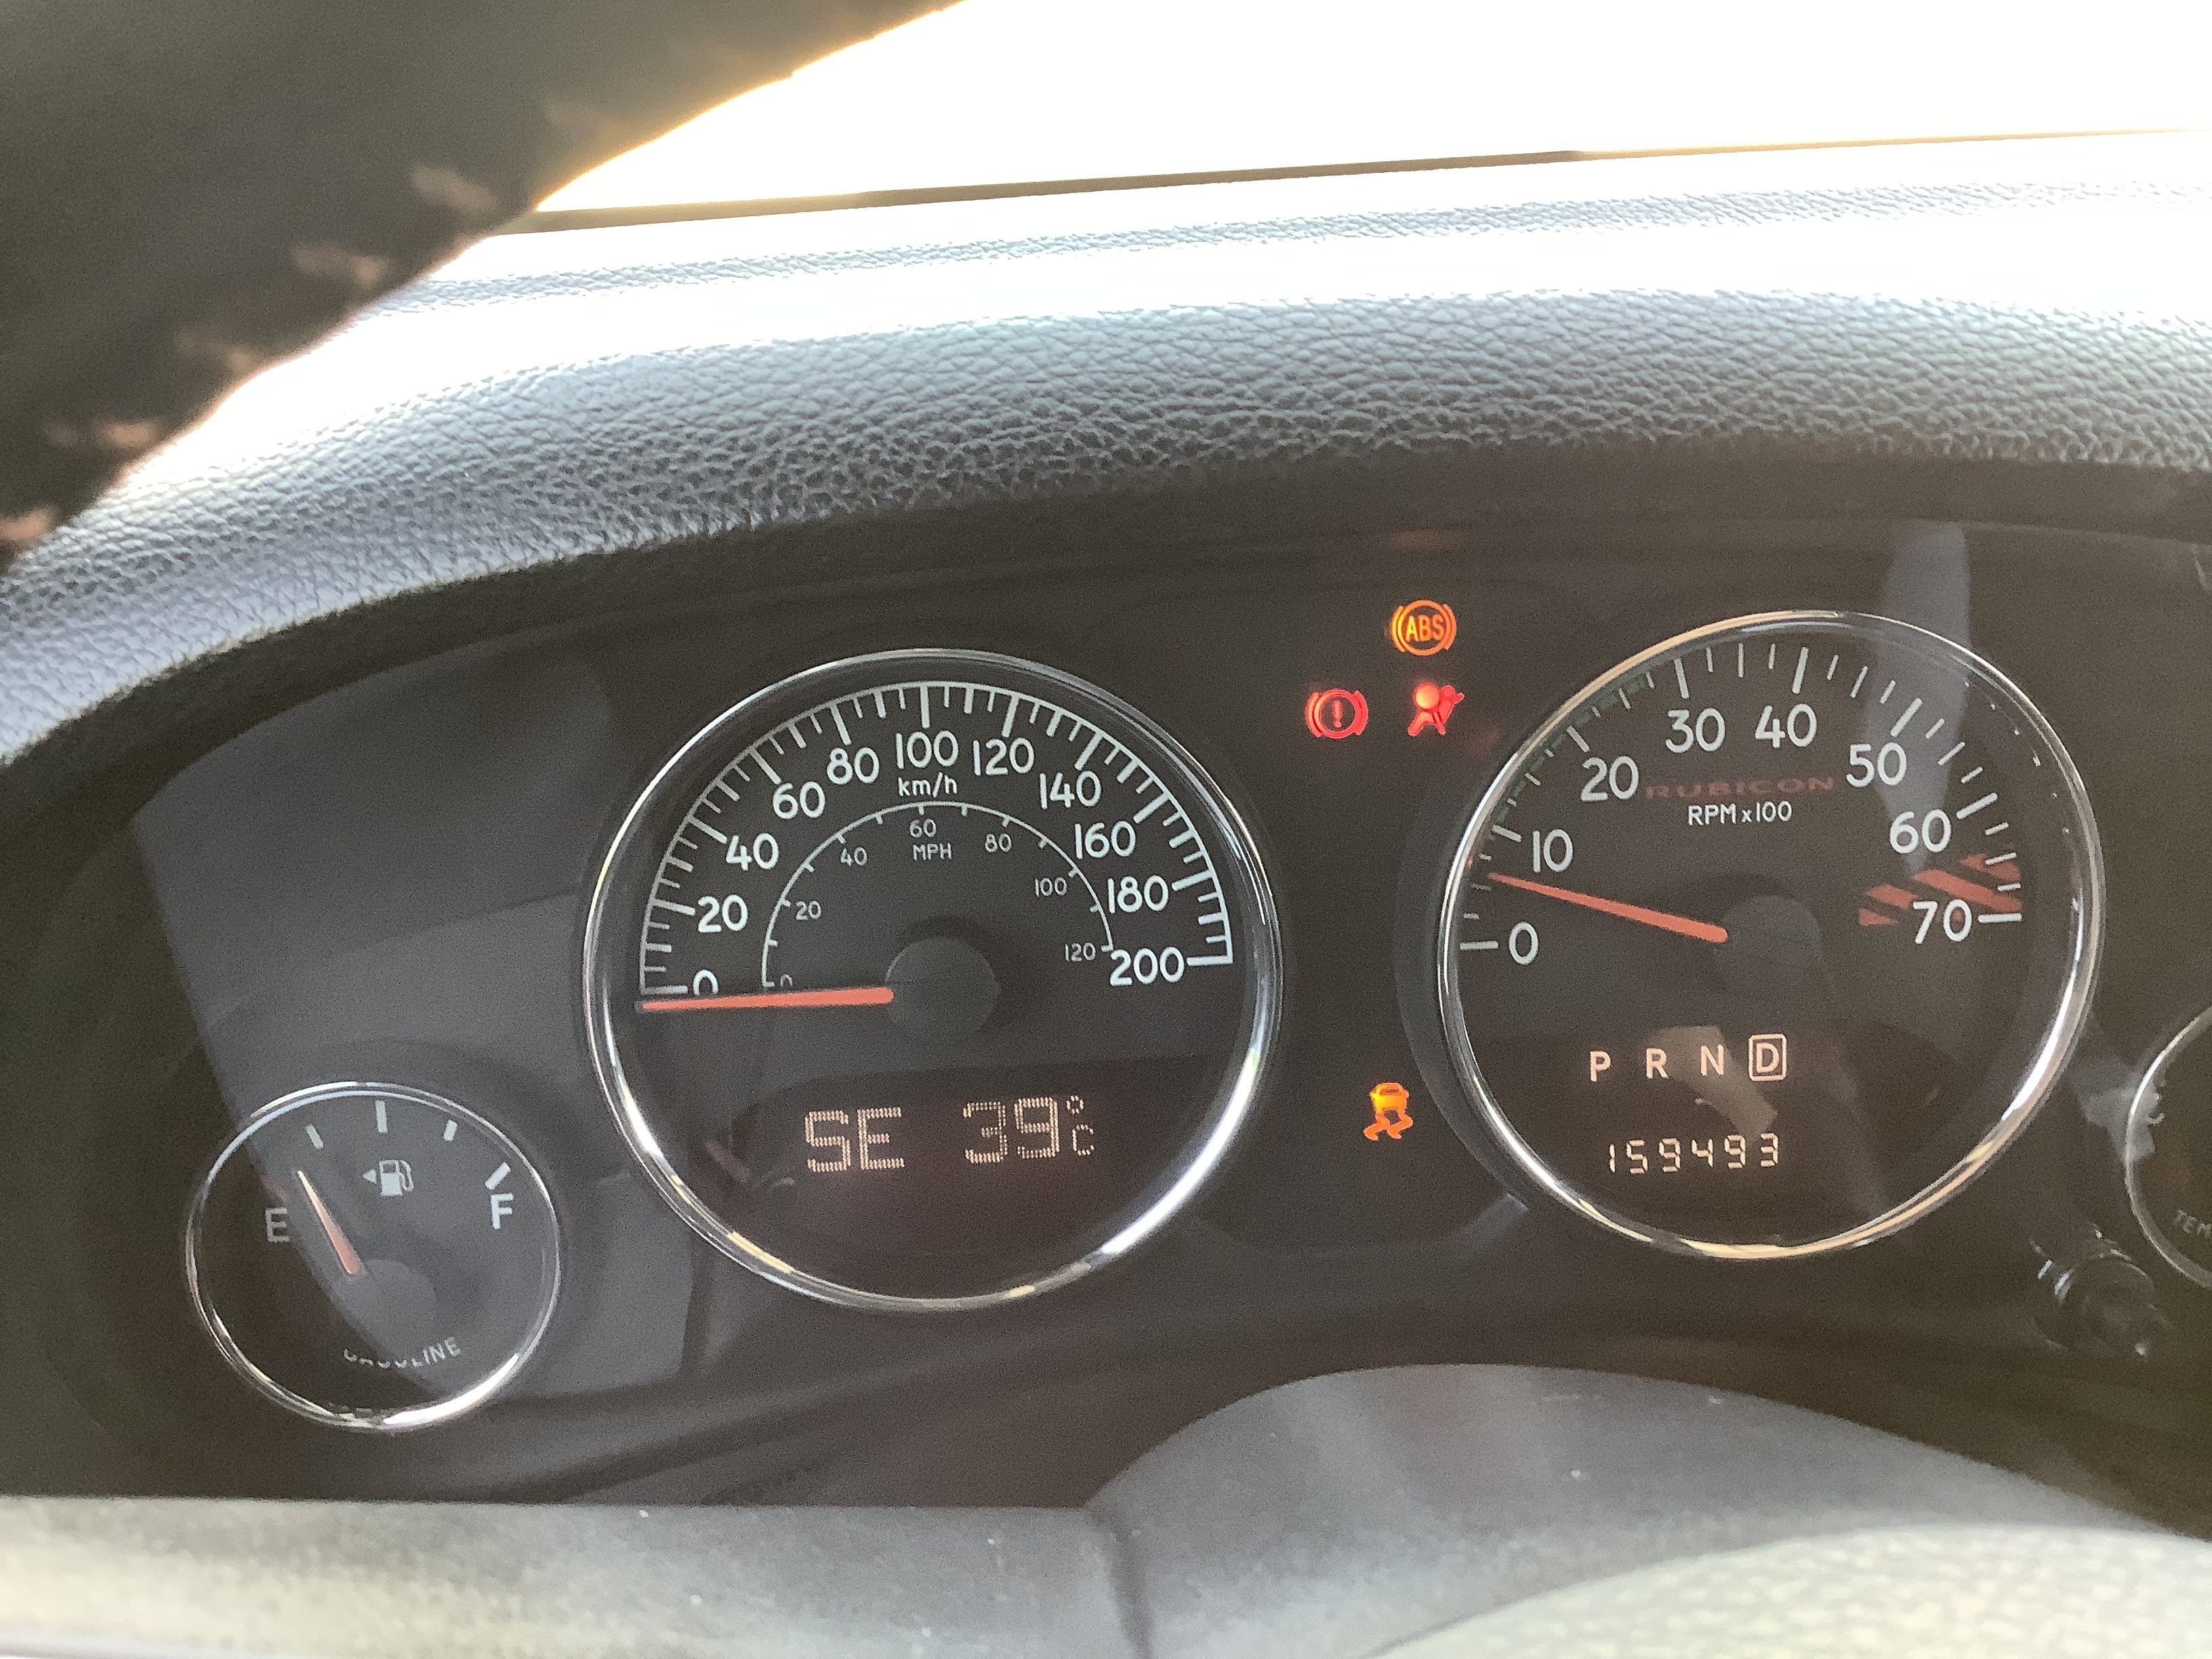 ABS, Airbag, Brake, and Traction Lights on | Jeep Wrangler Forum